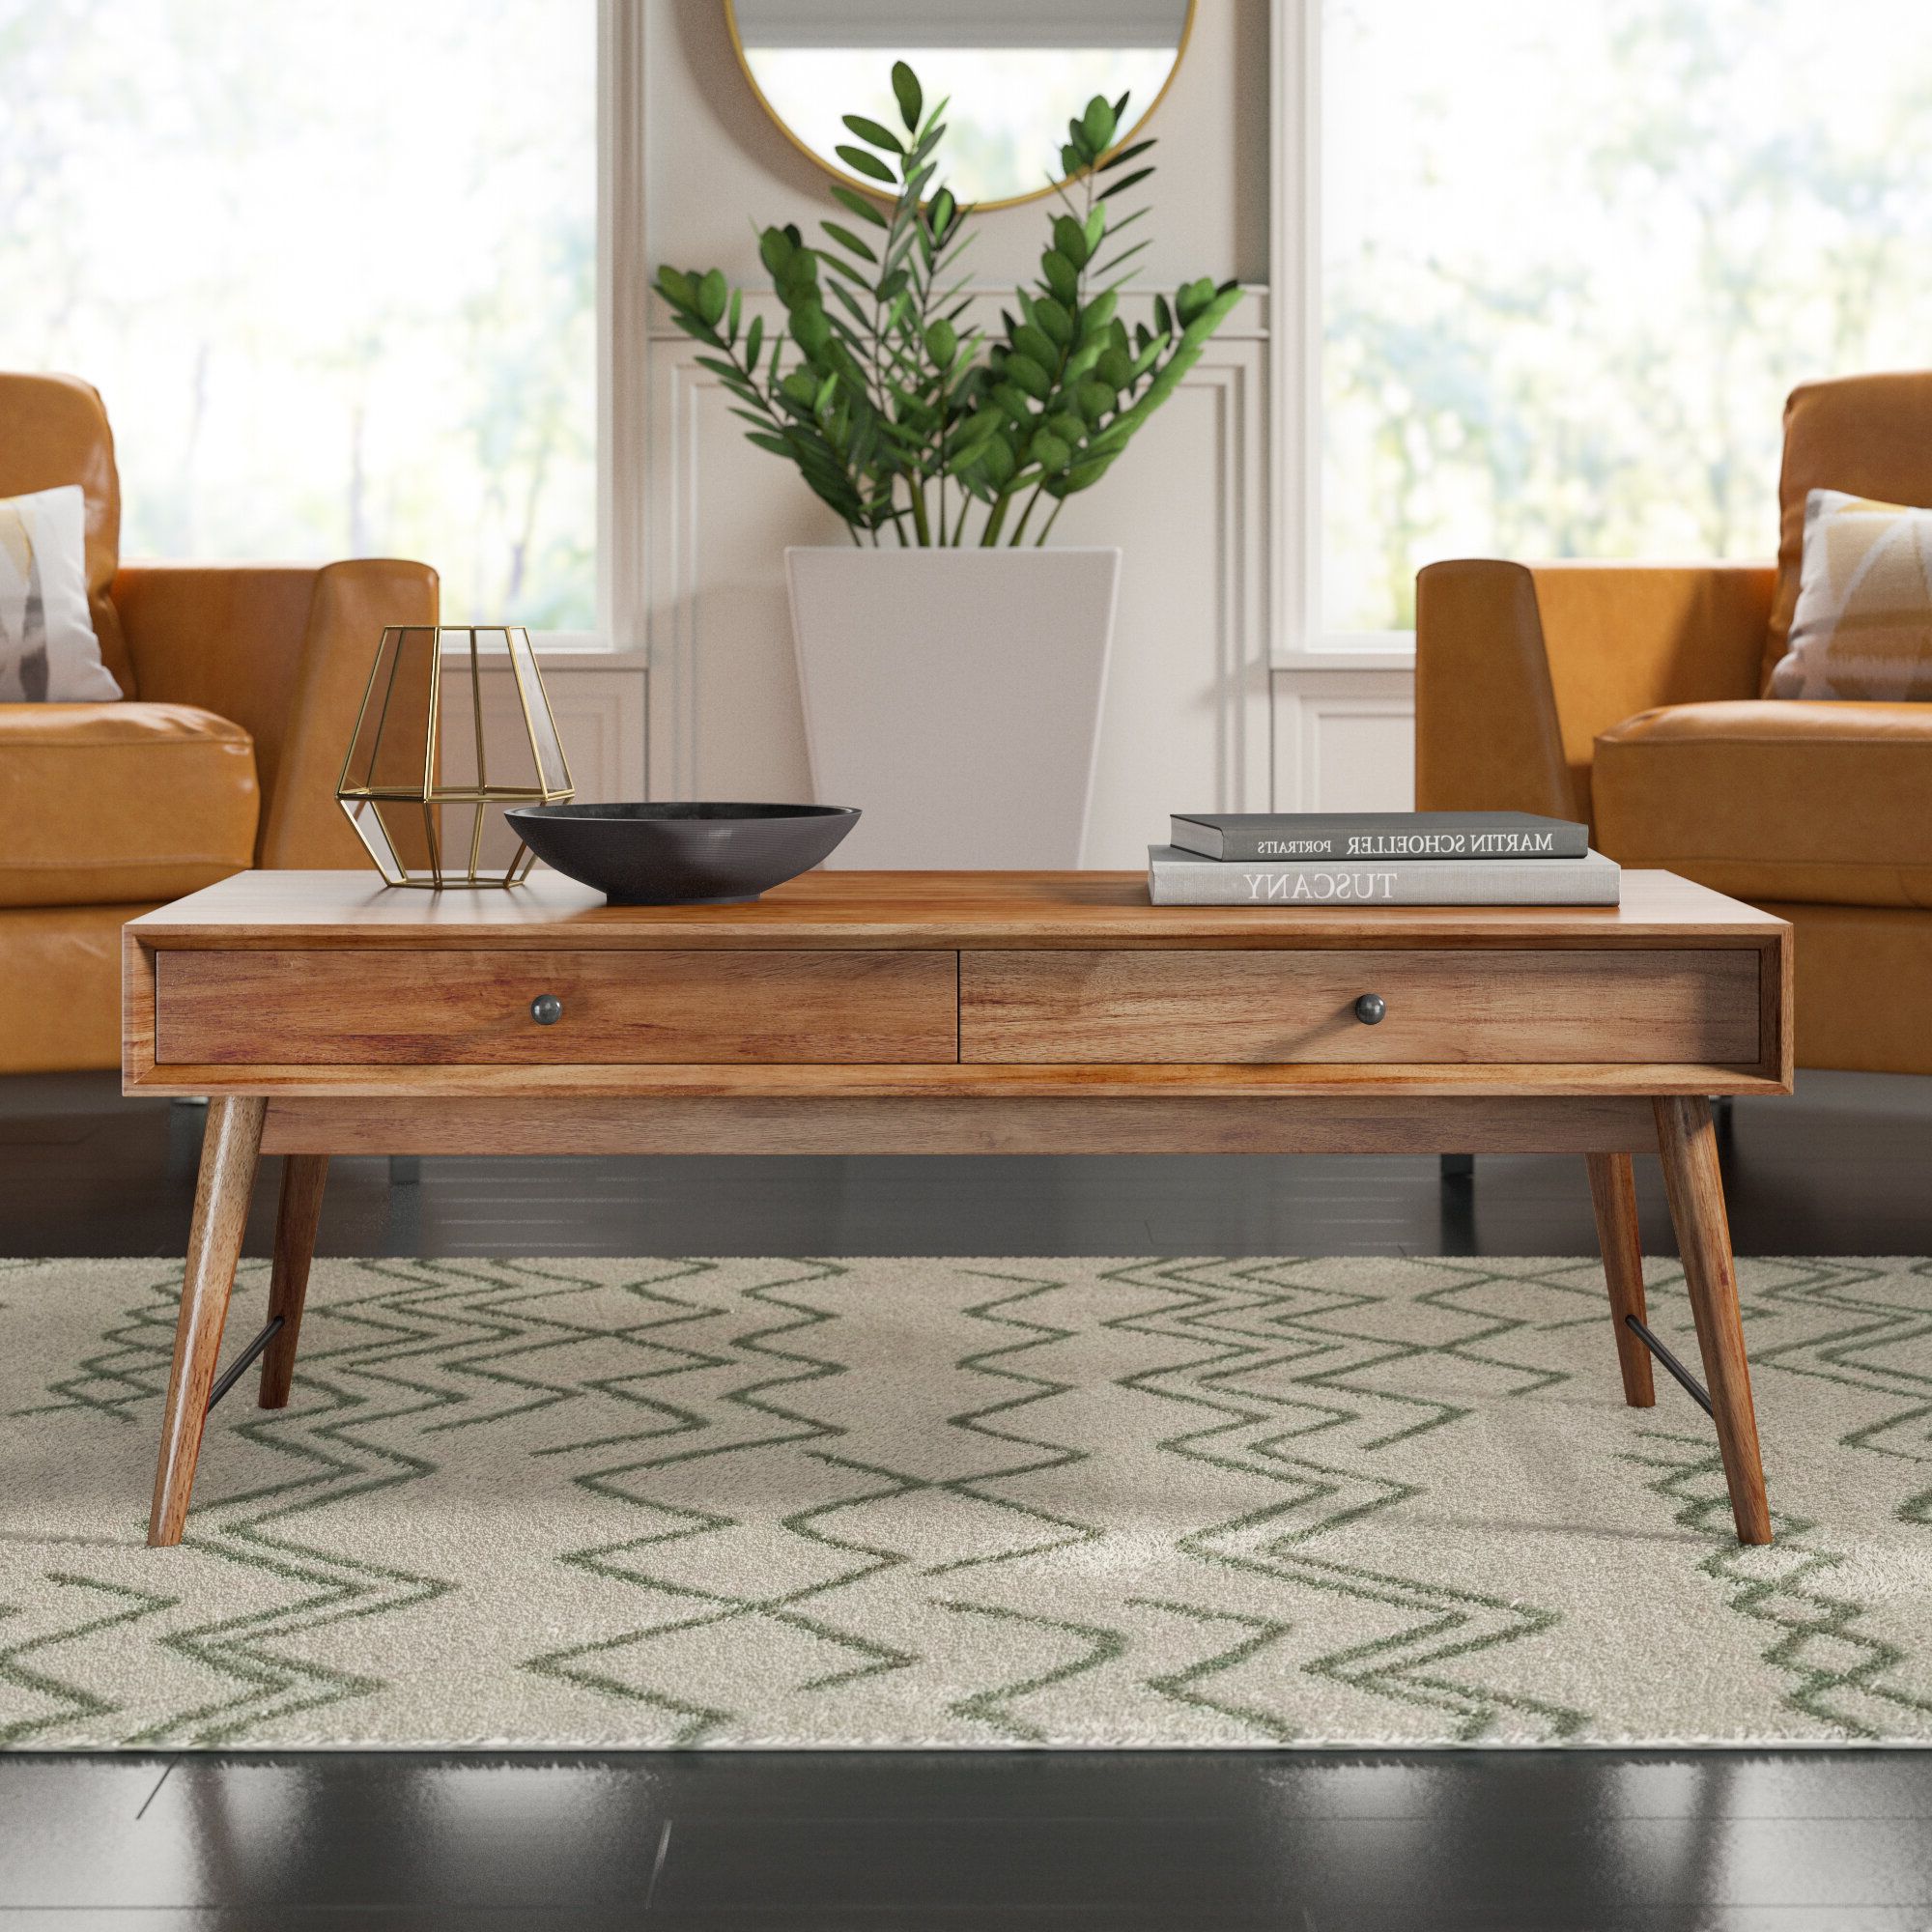 Wayfair Throughout Widely Used Scandinavian Coffee Tables (View 6 of 20)